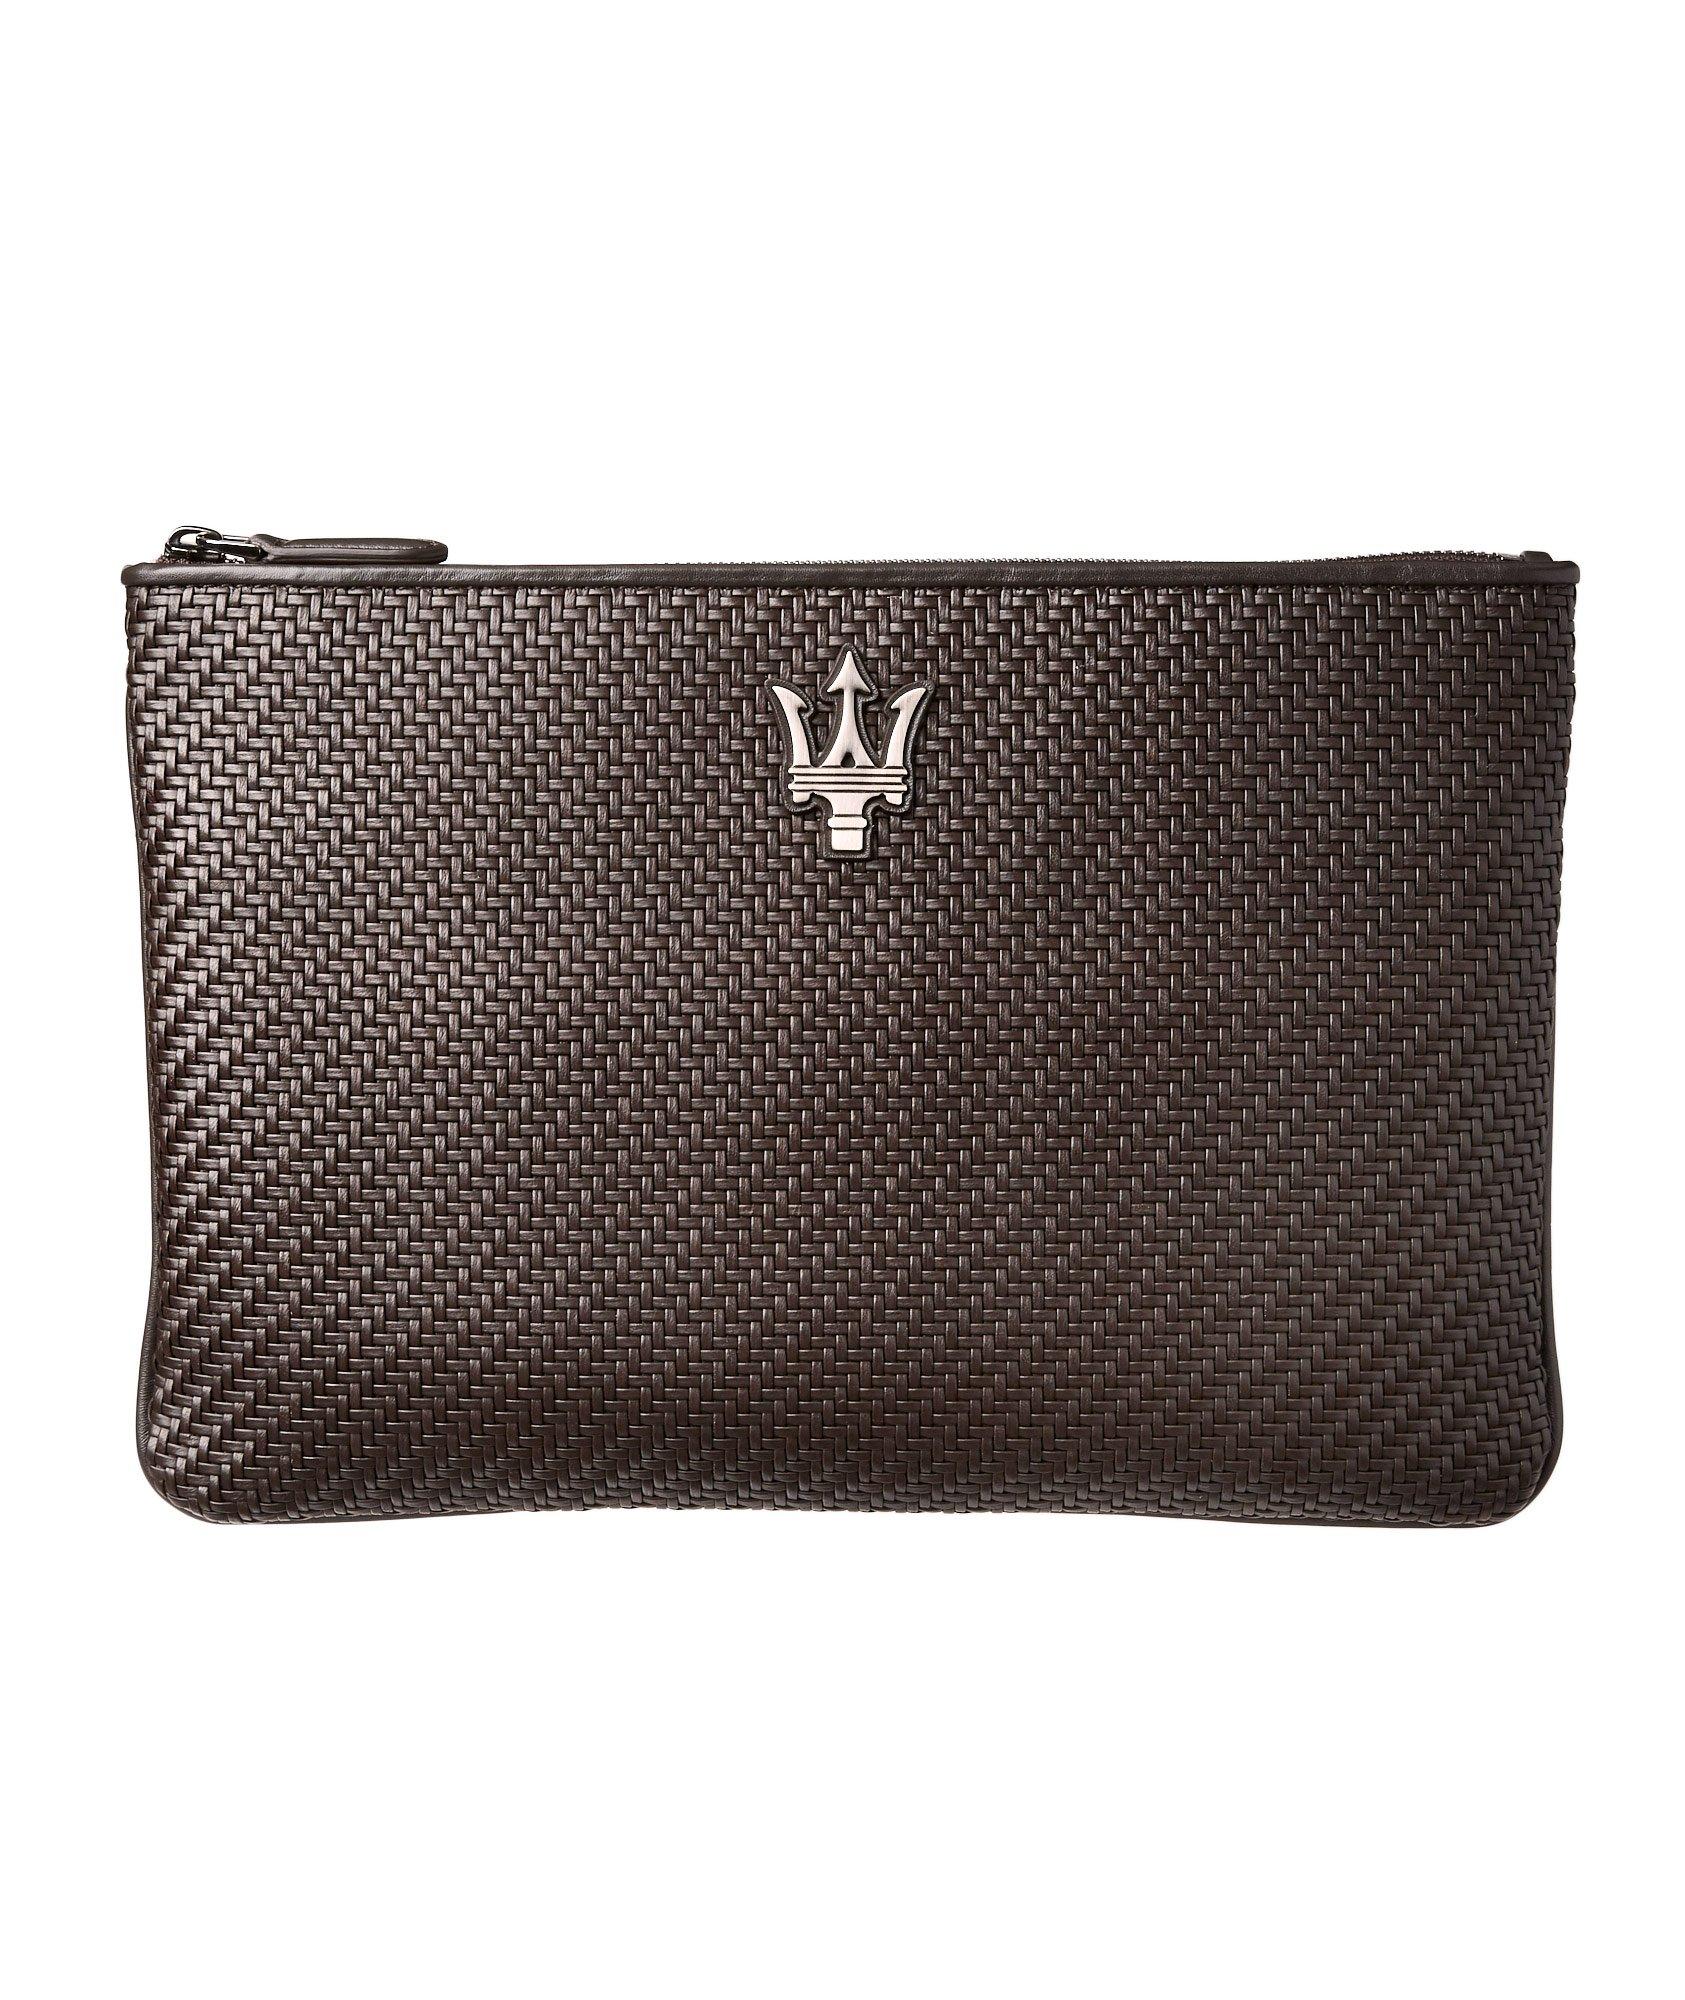 Leather Zip-Up Maserati Pouch image 0